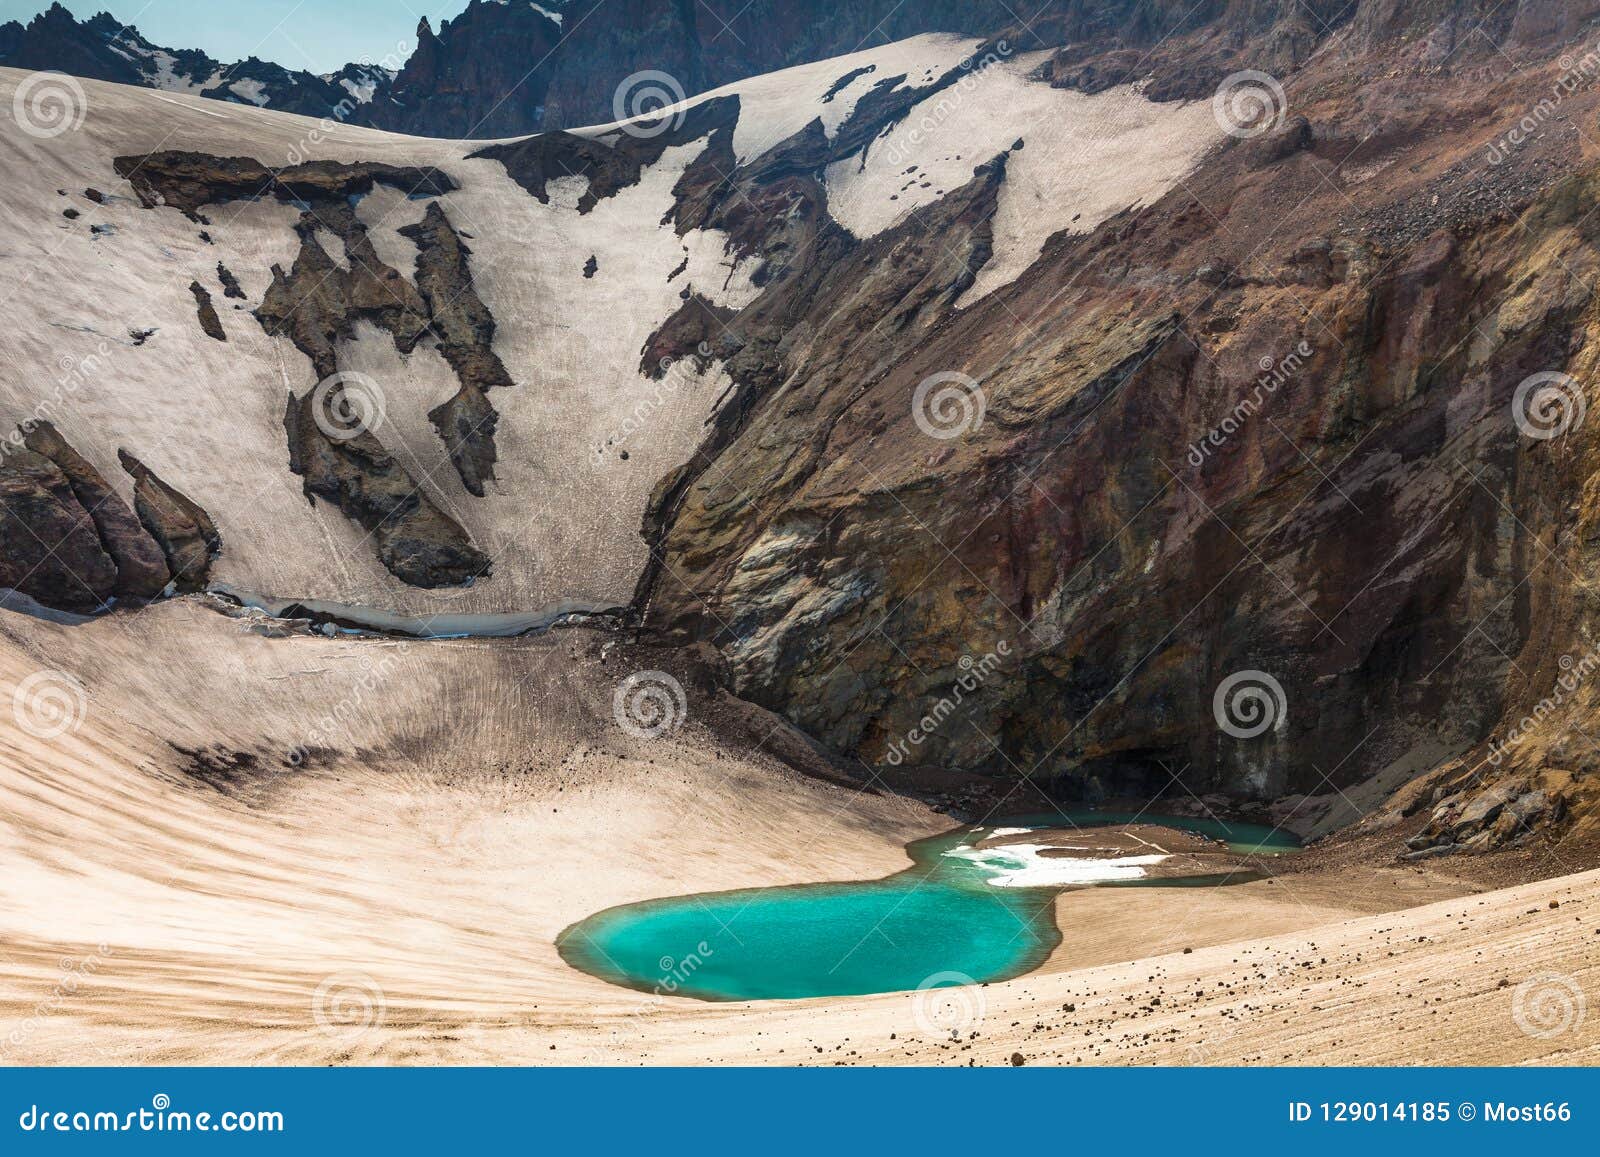 The Turquoise  Lake  In A Crater  Stock Image Image of 